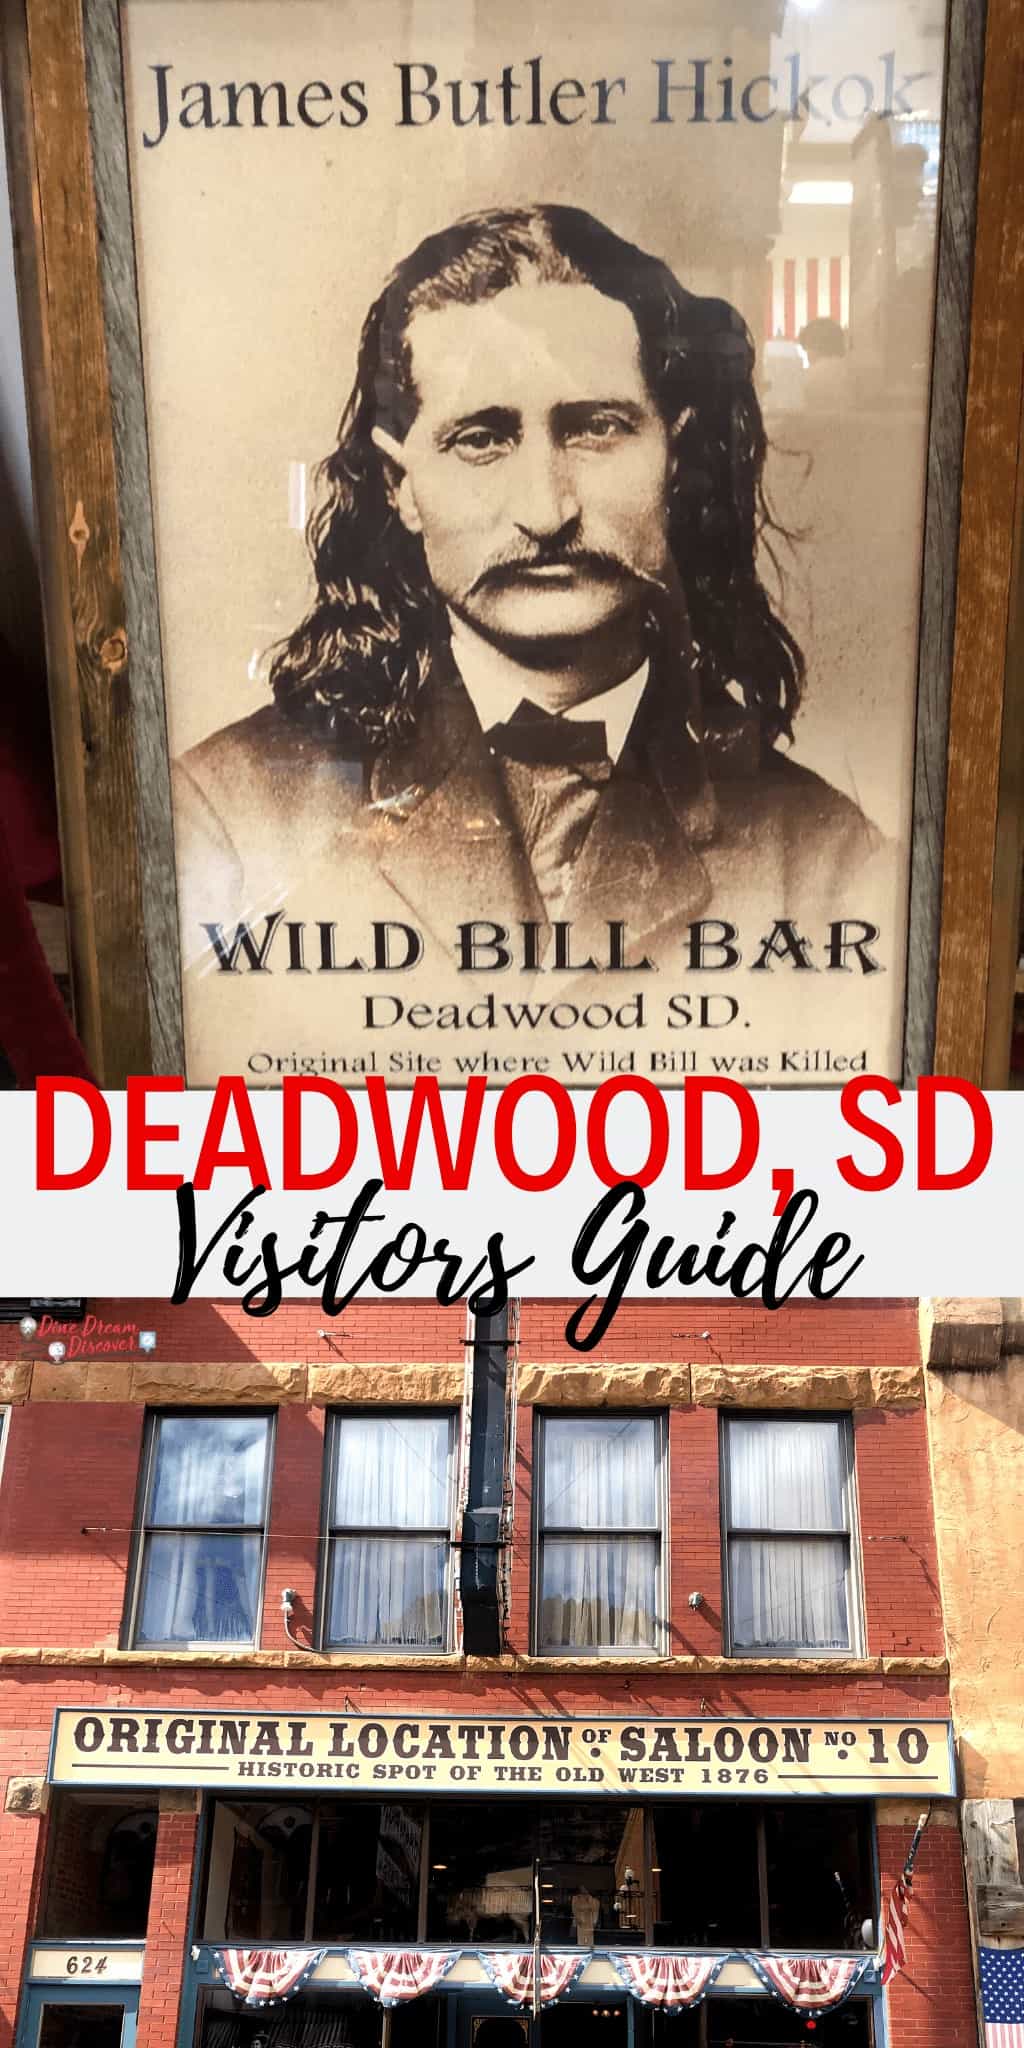 Deadwood, South Dakota, is one of the rare frontier towns that sprung up from nothing. It has survived through to the present day! Find out more about the area in this post.